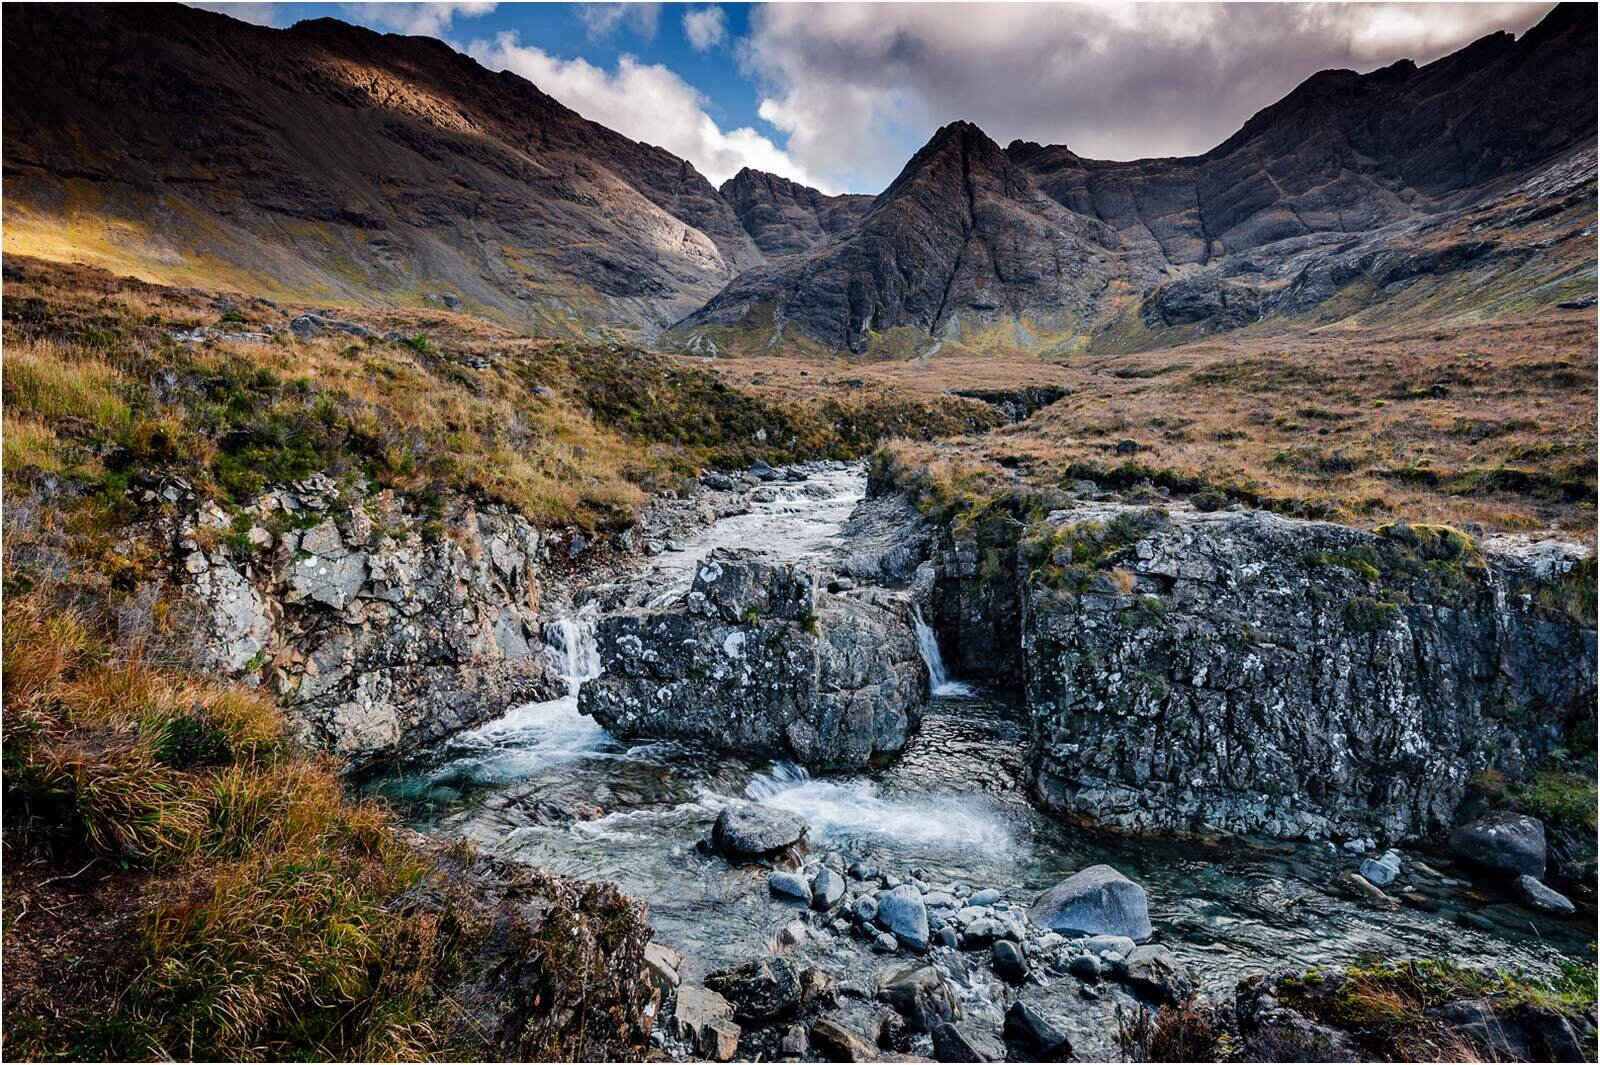 'Beyond the Fairy Pools'